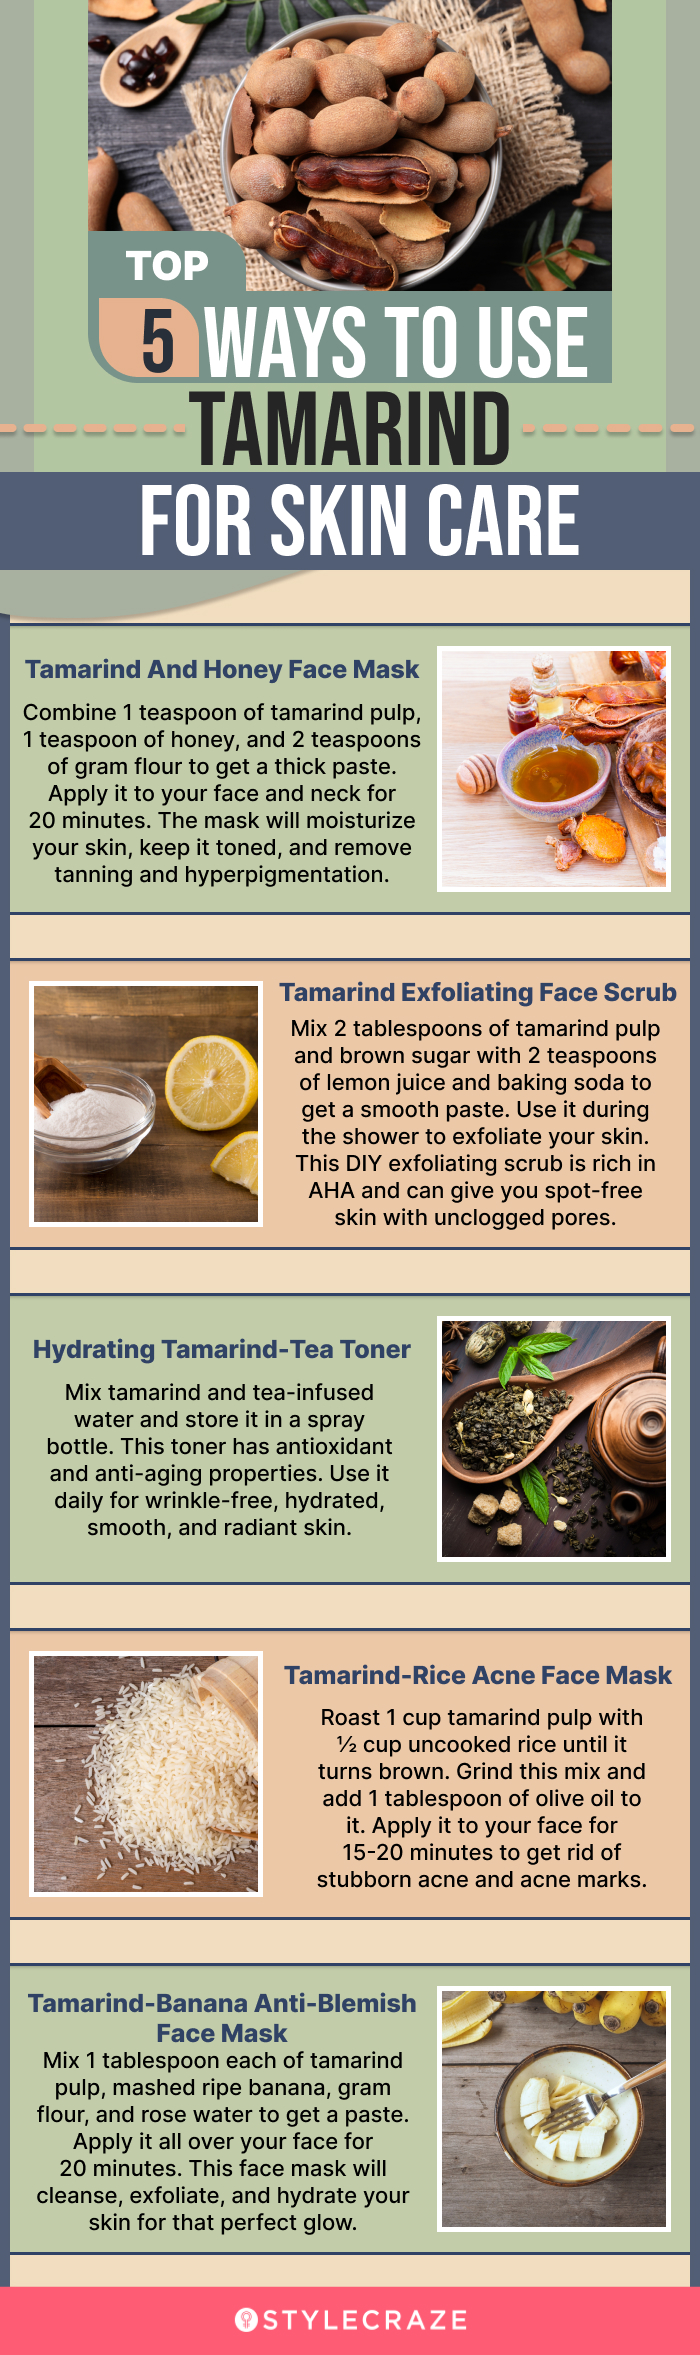 top 5 ways to use tamarind for skin care (infographic)